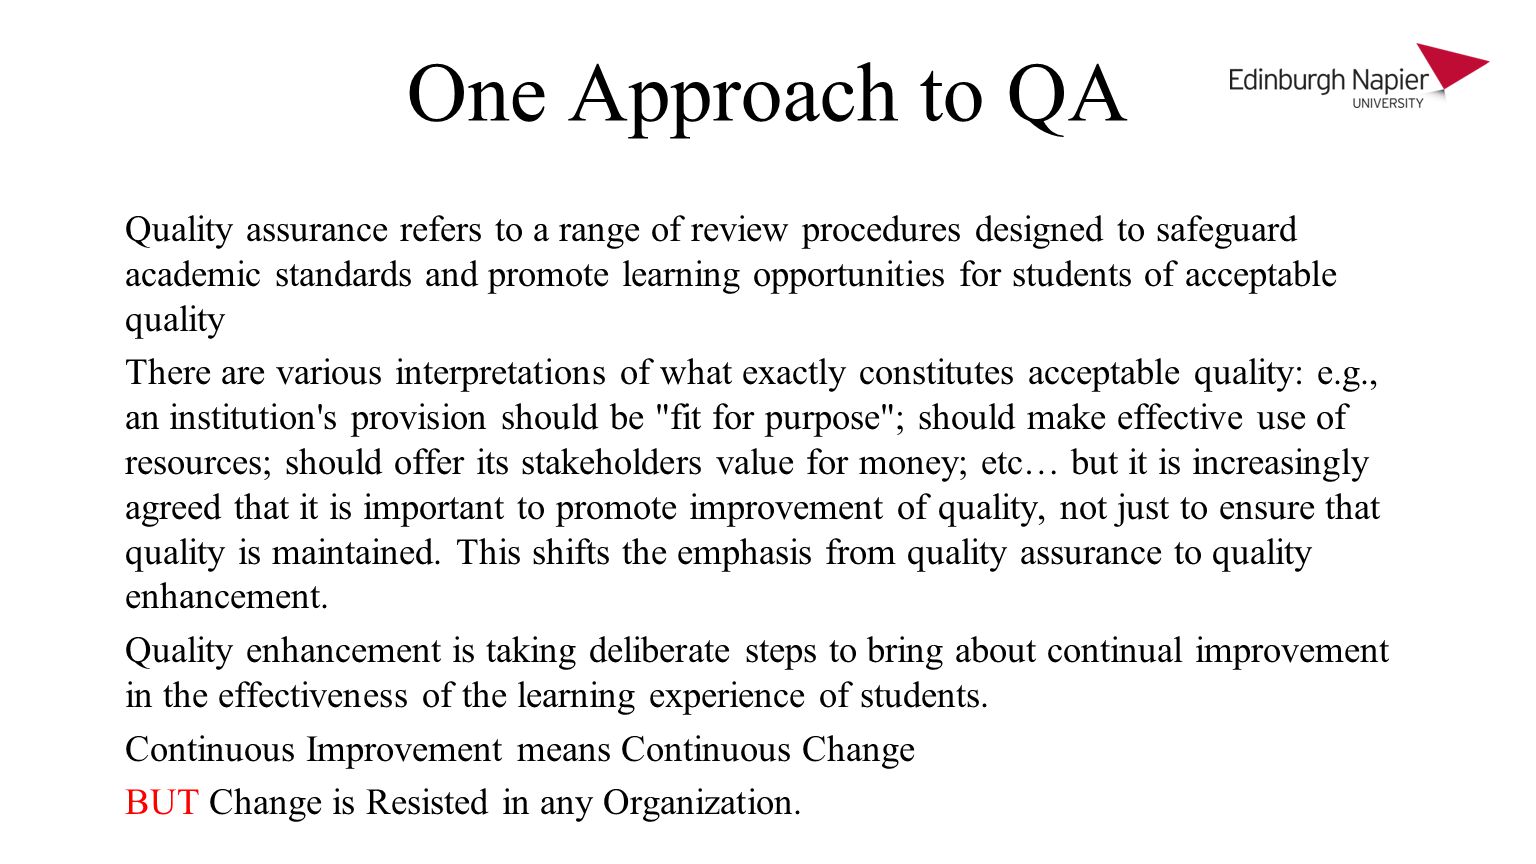 One Approach to QA Quality assurance refers to a range of review procedures designed to safeguard academic standards and promote learning opportunities for students of acceptable quality There are various interpretations of what exactly constitutes acceptable quality: e.g., an institution s provision should be fit for purpose ; should make effective use of resources; should offer its stakeholders value for money; etc… but it is increasingly agreed that it is important to promote improvement of quality, not just to ensure that quality is maintained.